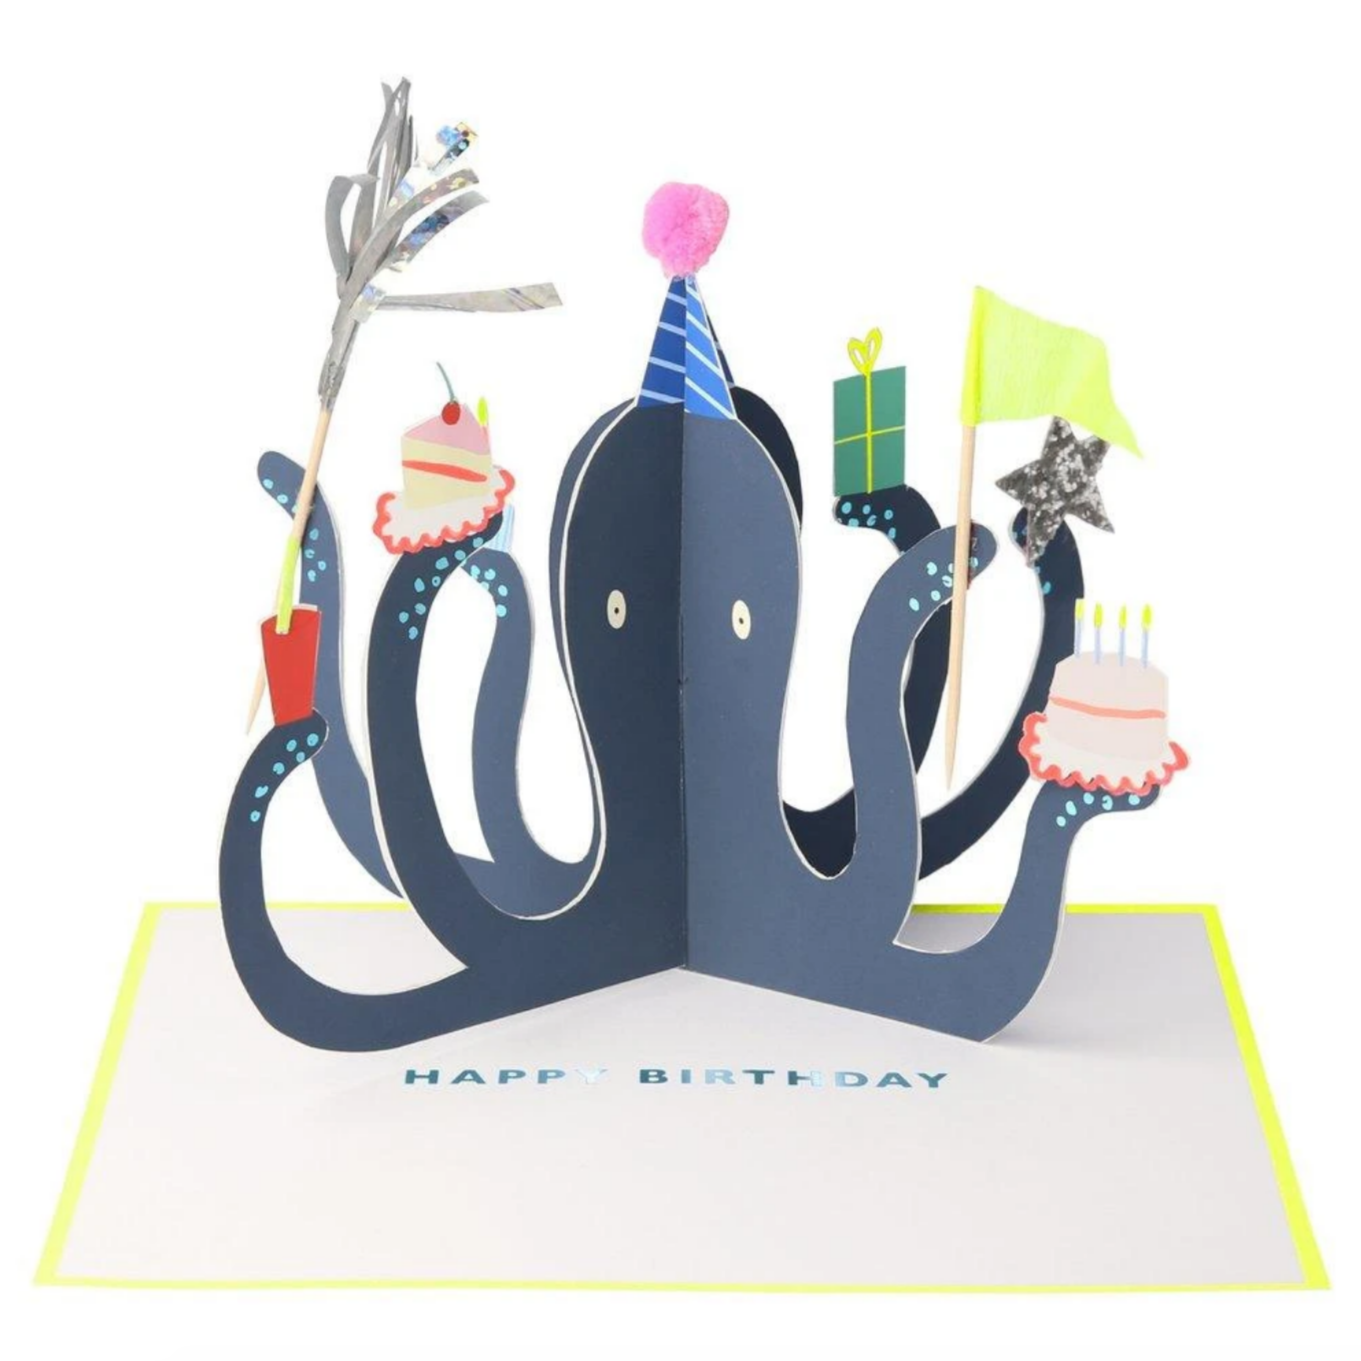 paper octopus holding cake and presents on "happy birthday" card